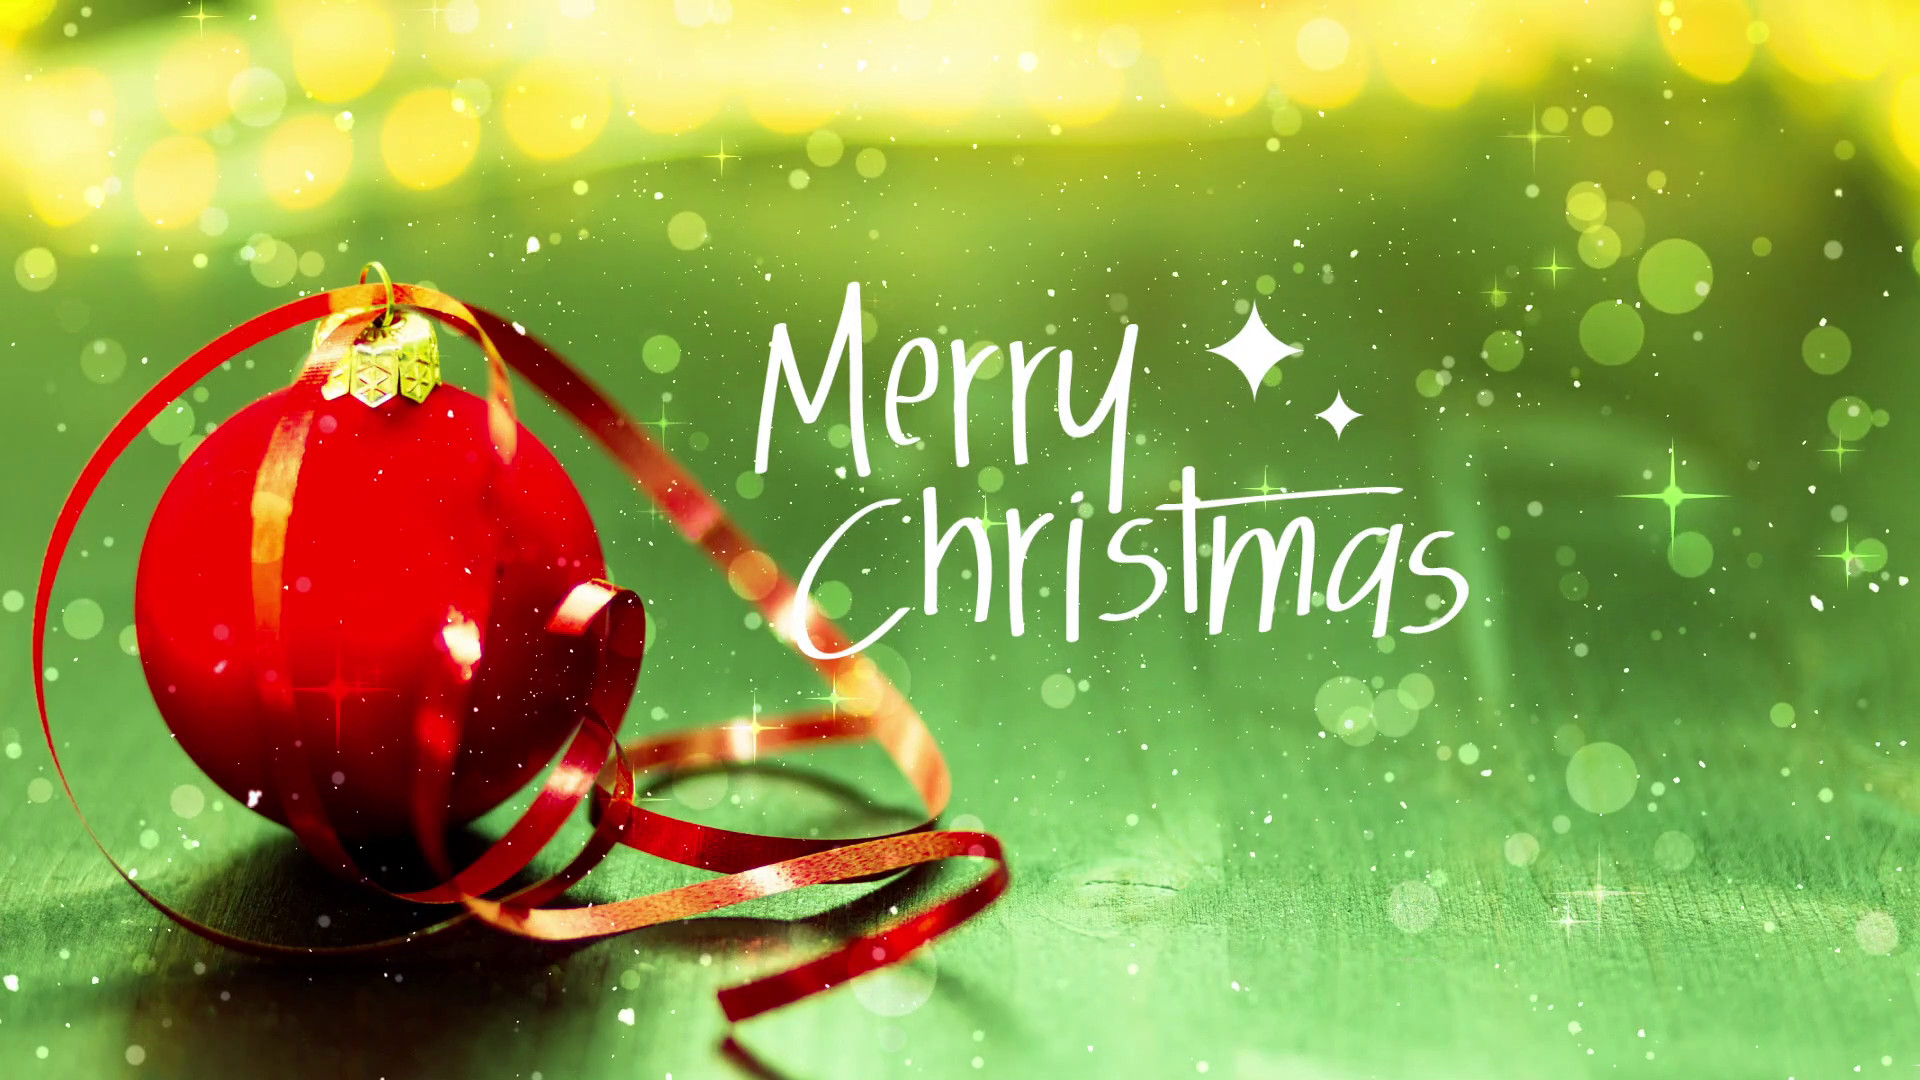 1920x1080 Merry Christmas Background. Red Ornament On Green Backdrop Motion Background  - Storyblocks Video